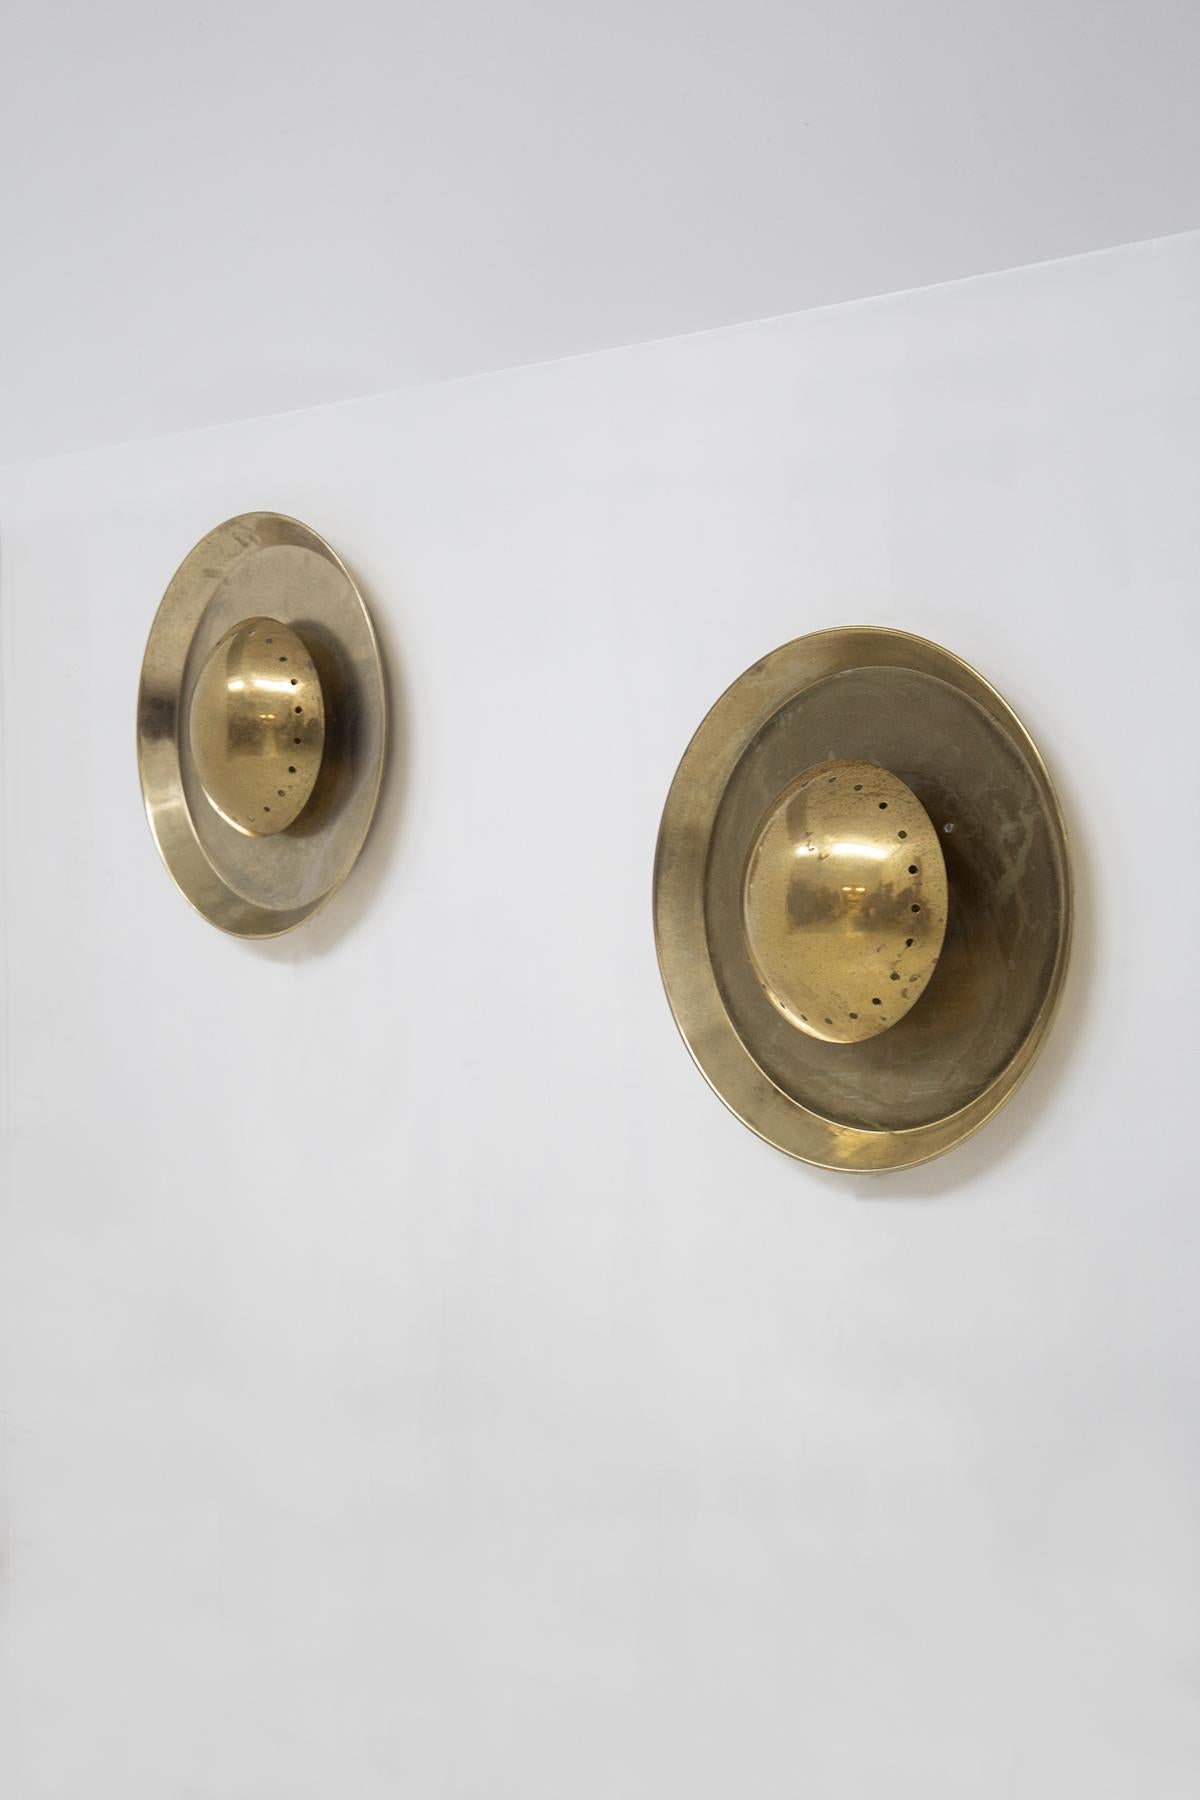 Pair of brass lamps designed and produced in the 20th century, of fine Italian manufacture. The wall lamps are made entirely of brass and have a circular shape. It is a geometric play, because inside the circle there are two other circles, a larger